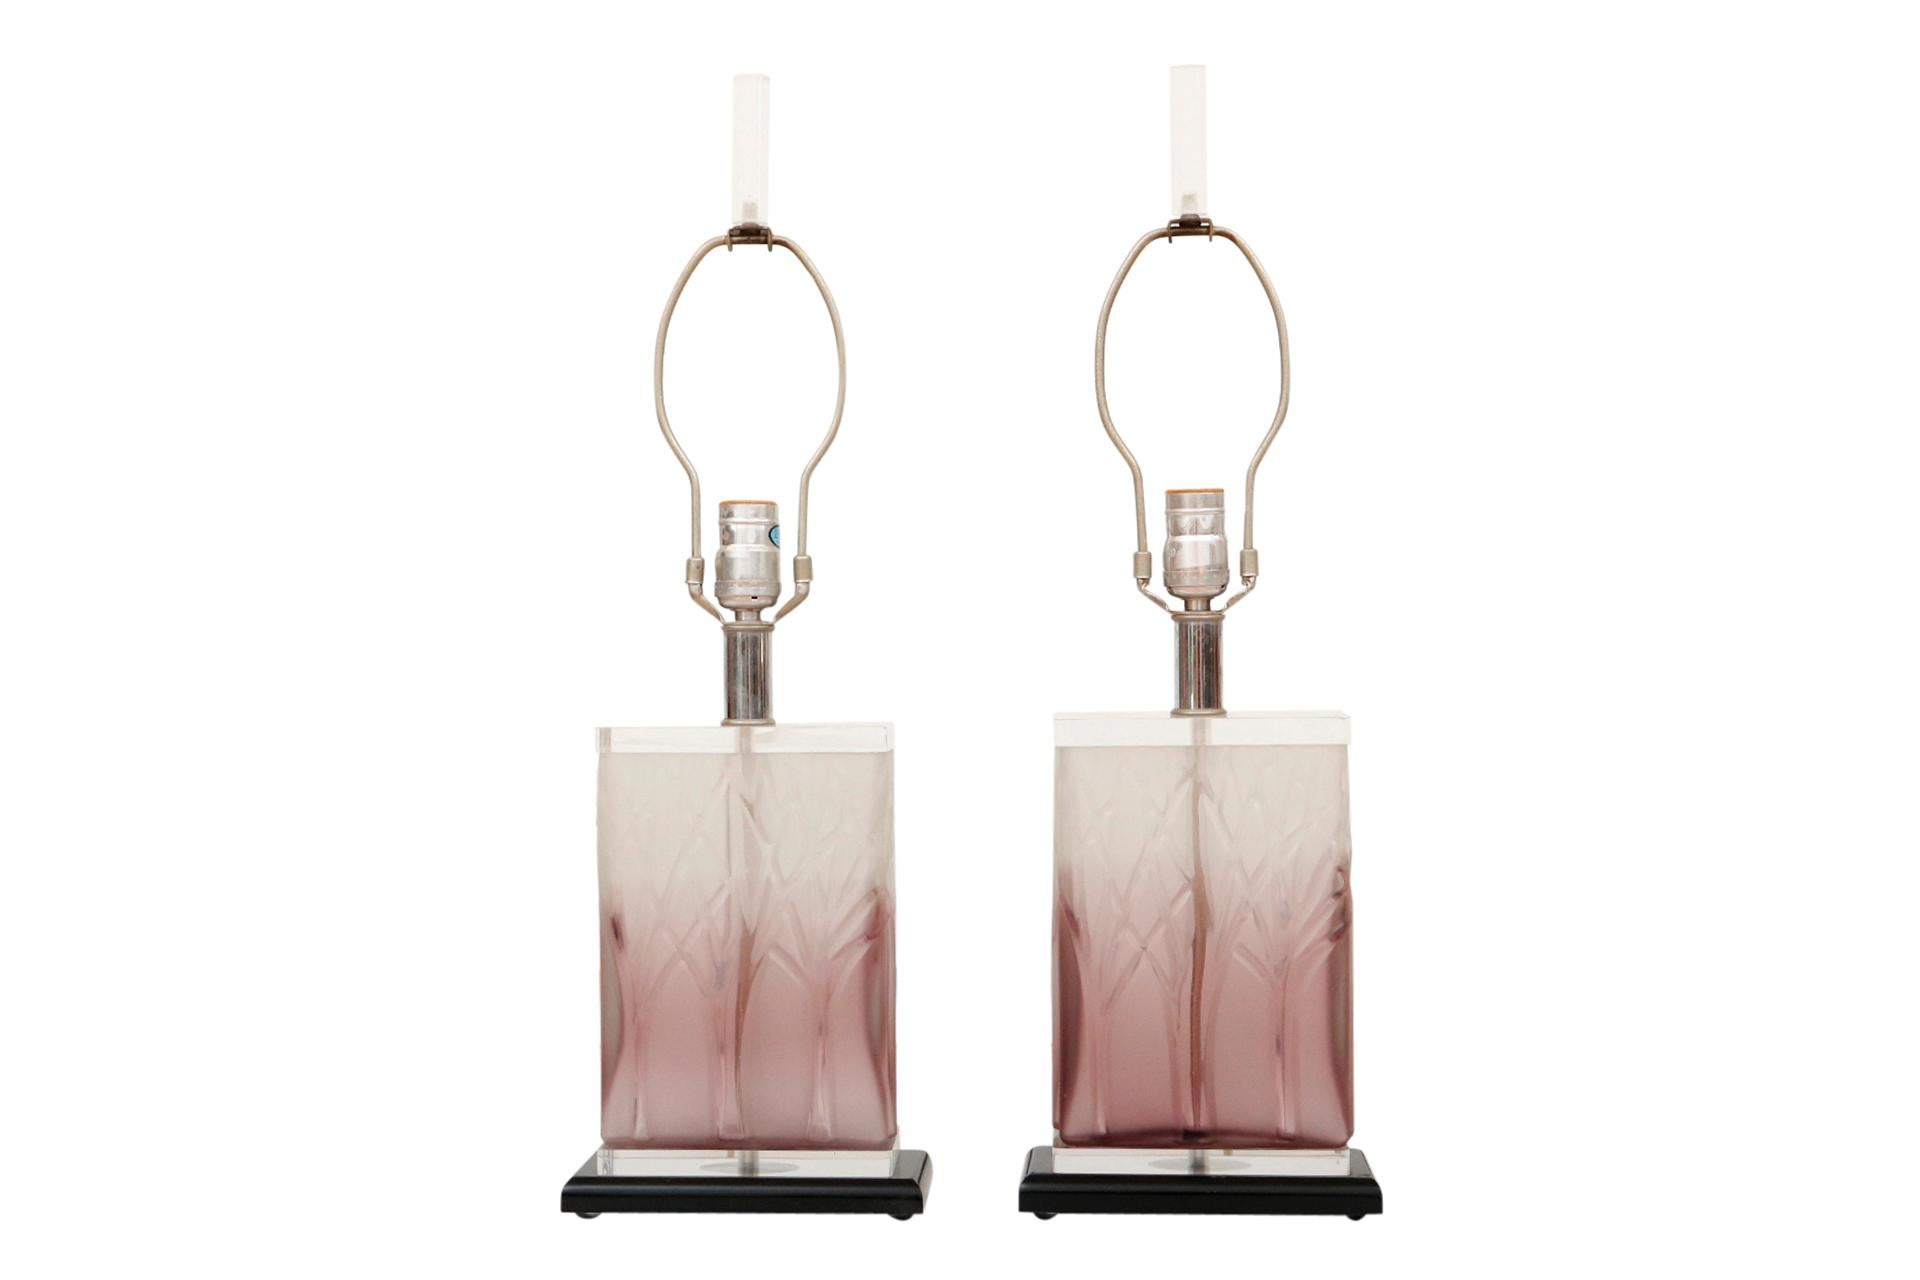 A pair of 1980’s Hollywood Regency lucite table lamps. Blocks of translucent lucite are rich purple fading to white and pressed with trees in the front and back. Short chrome columns support sockets, harps and cylindrical clear lucite finials.